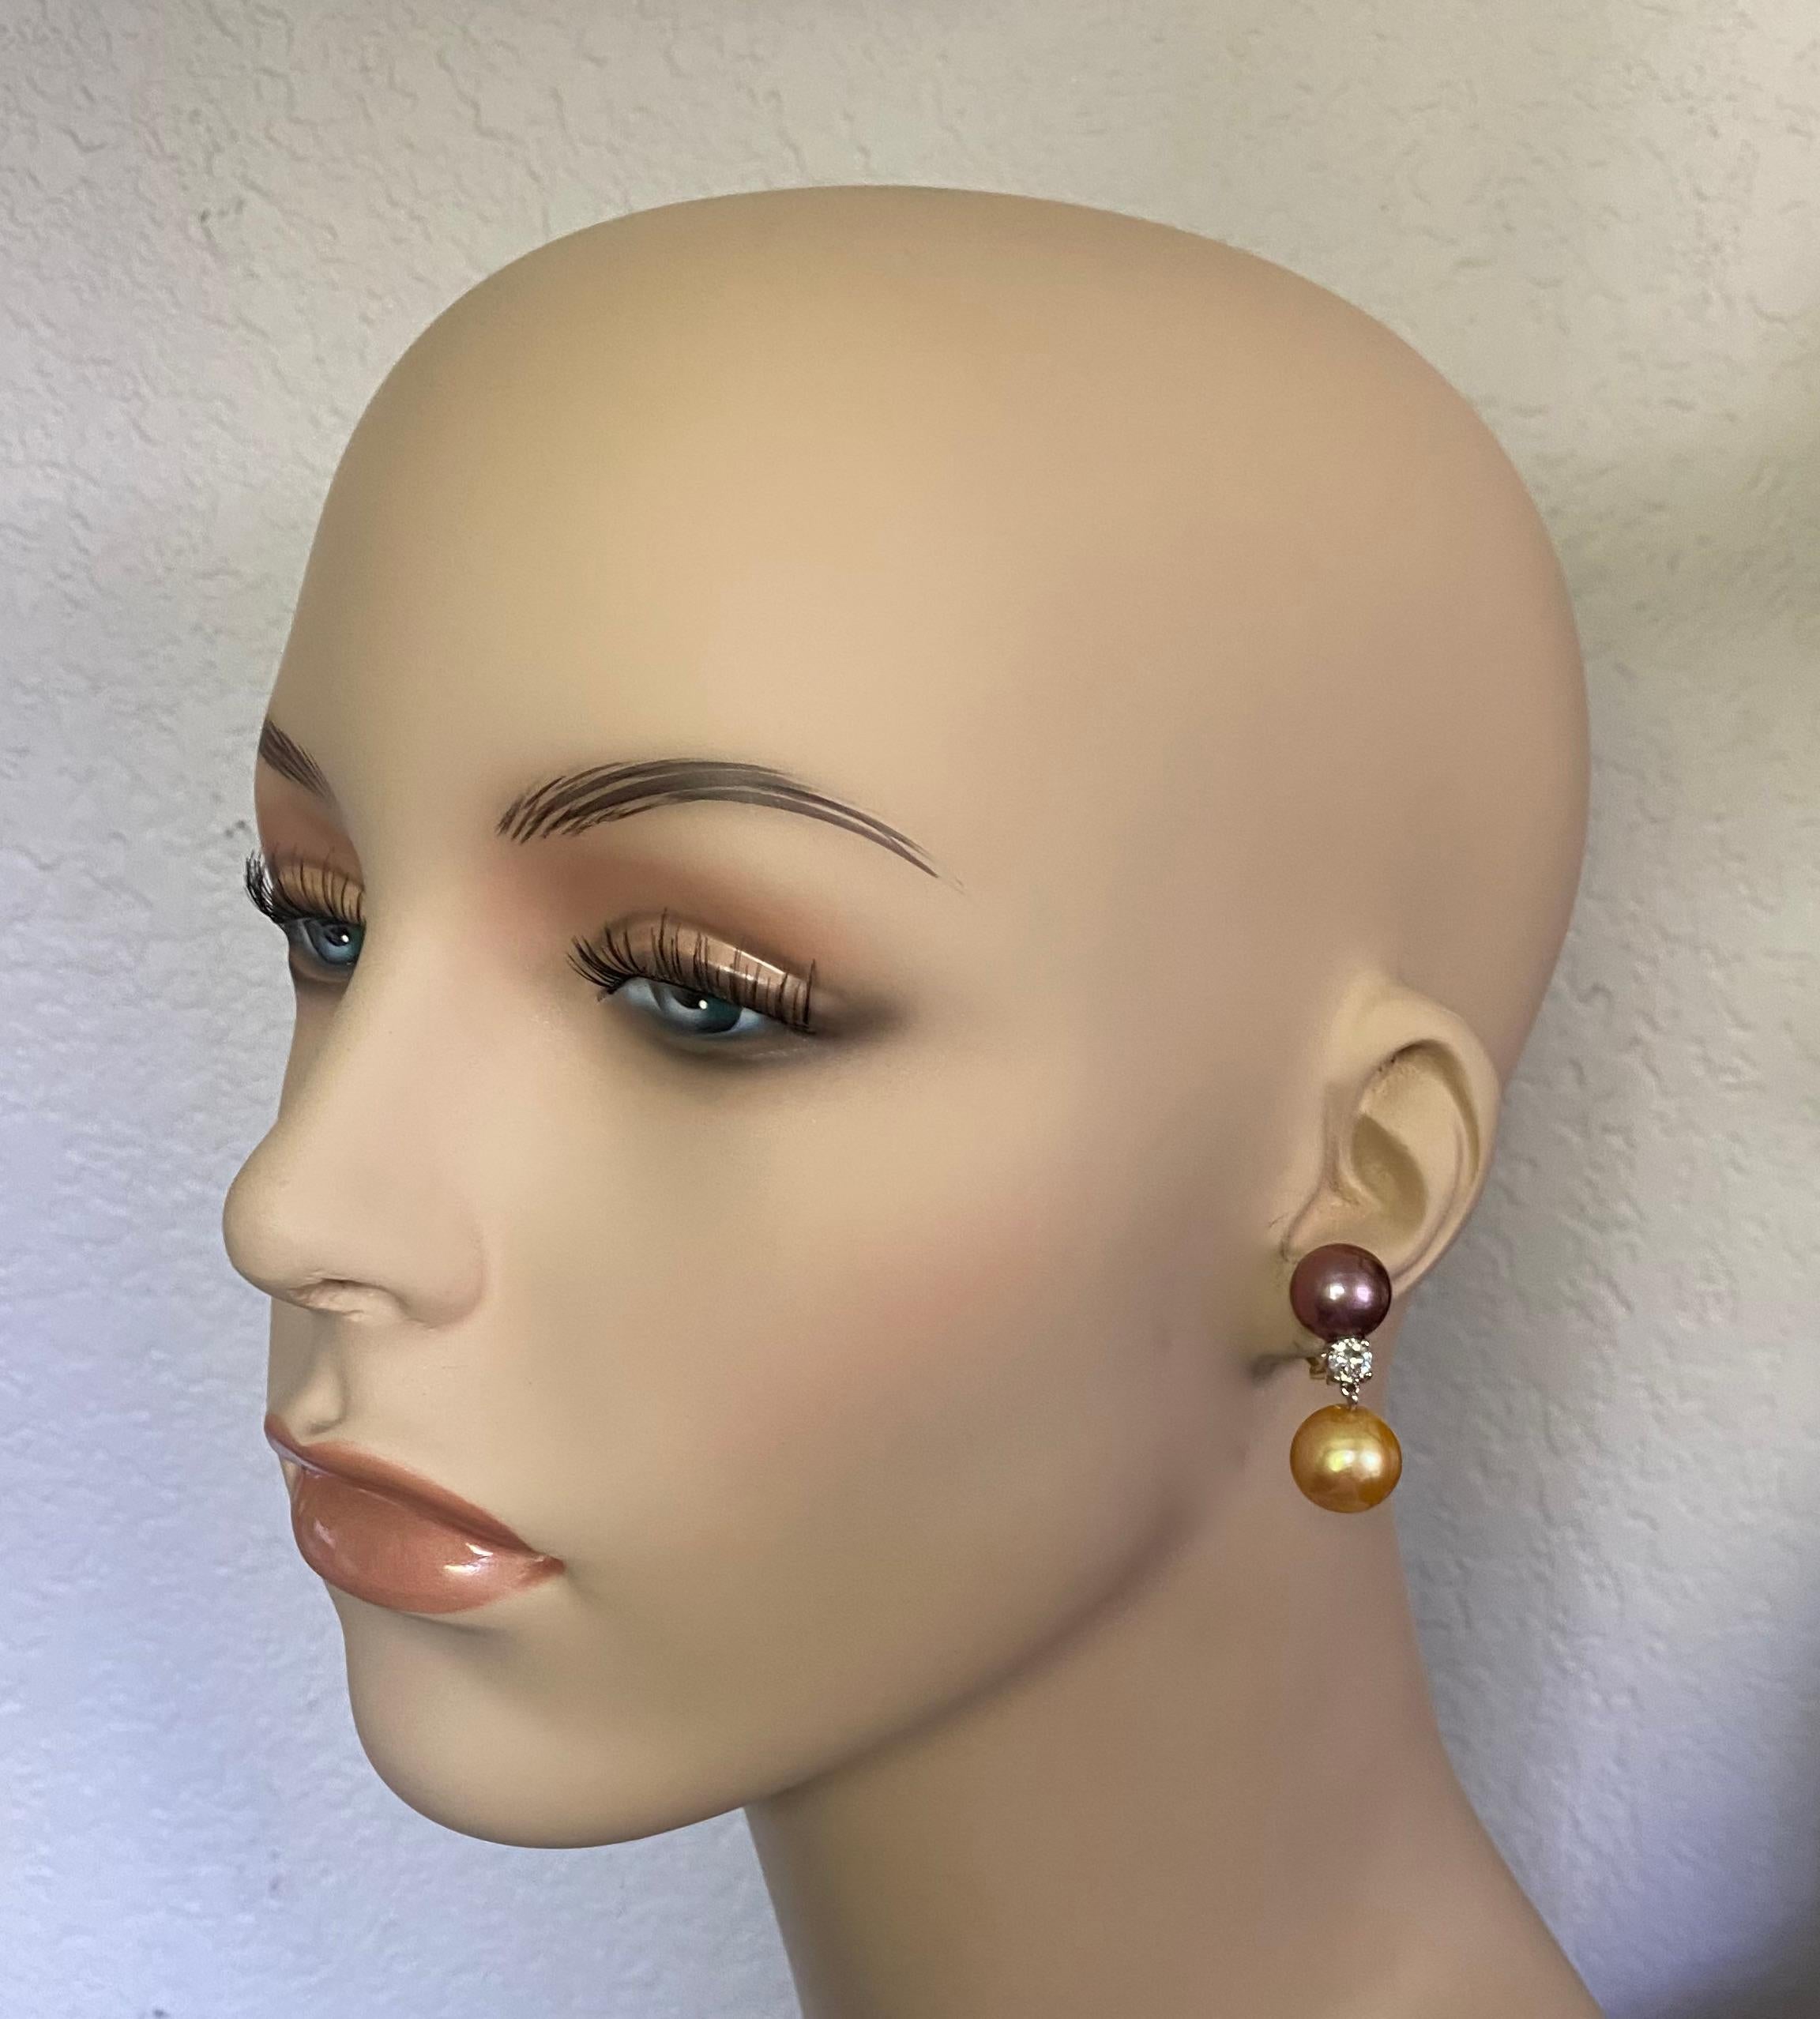 Tahitian and South Seas pearls combine to create these sophisticated dangle earrings.  The pearls measure 12mm and 14mm respectfully and come in complimentary shades of pink, cream, gold and gray.  The pearls are all gem quality and possess a